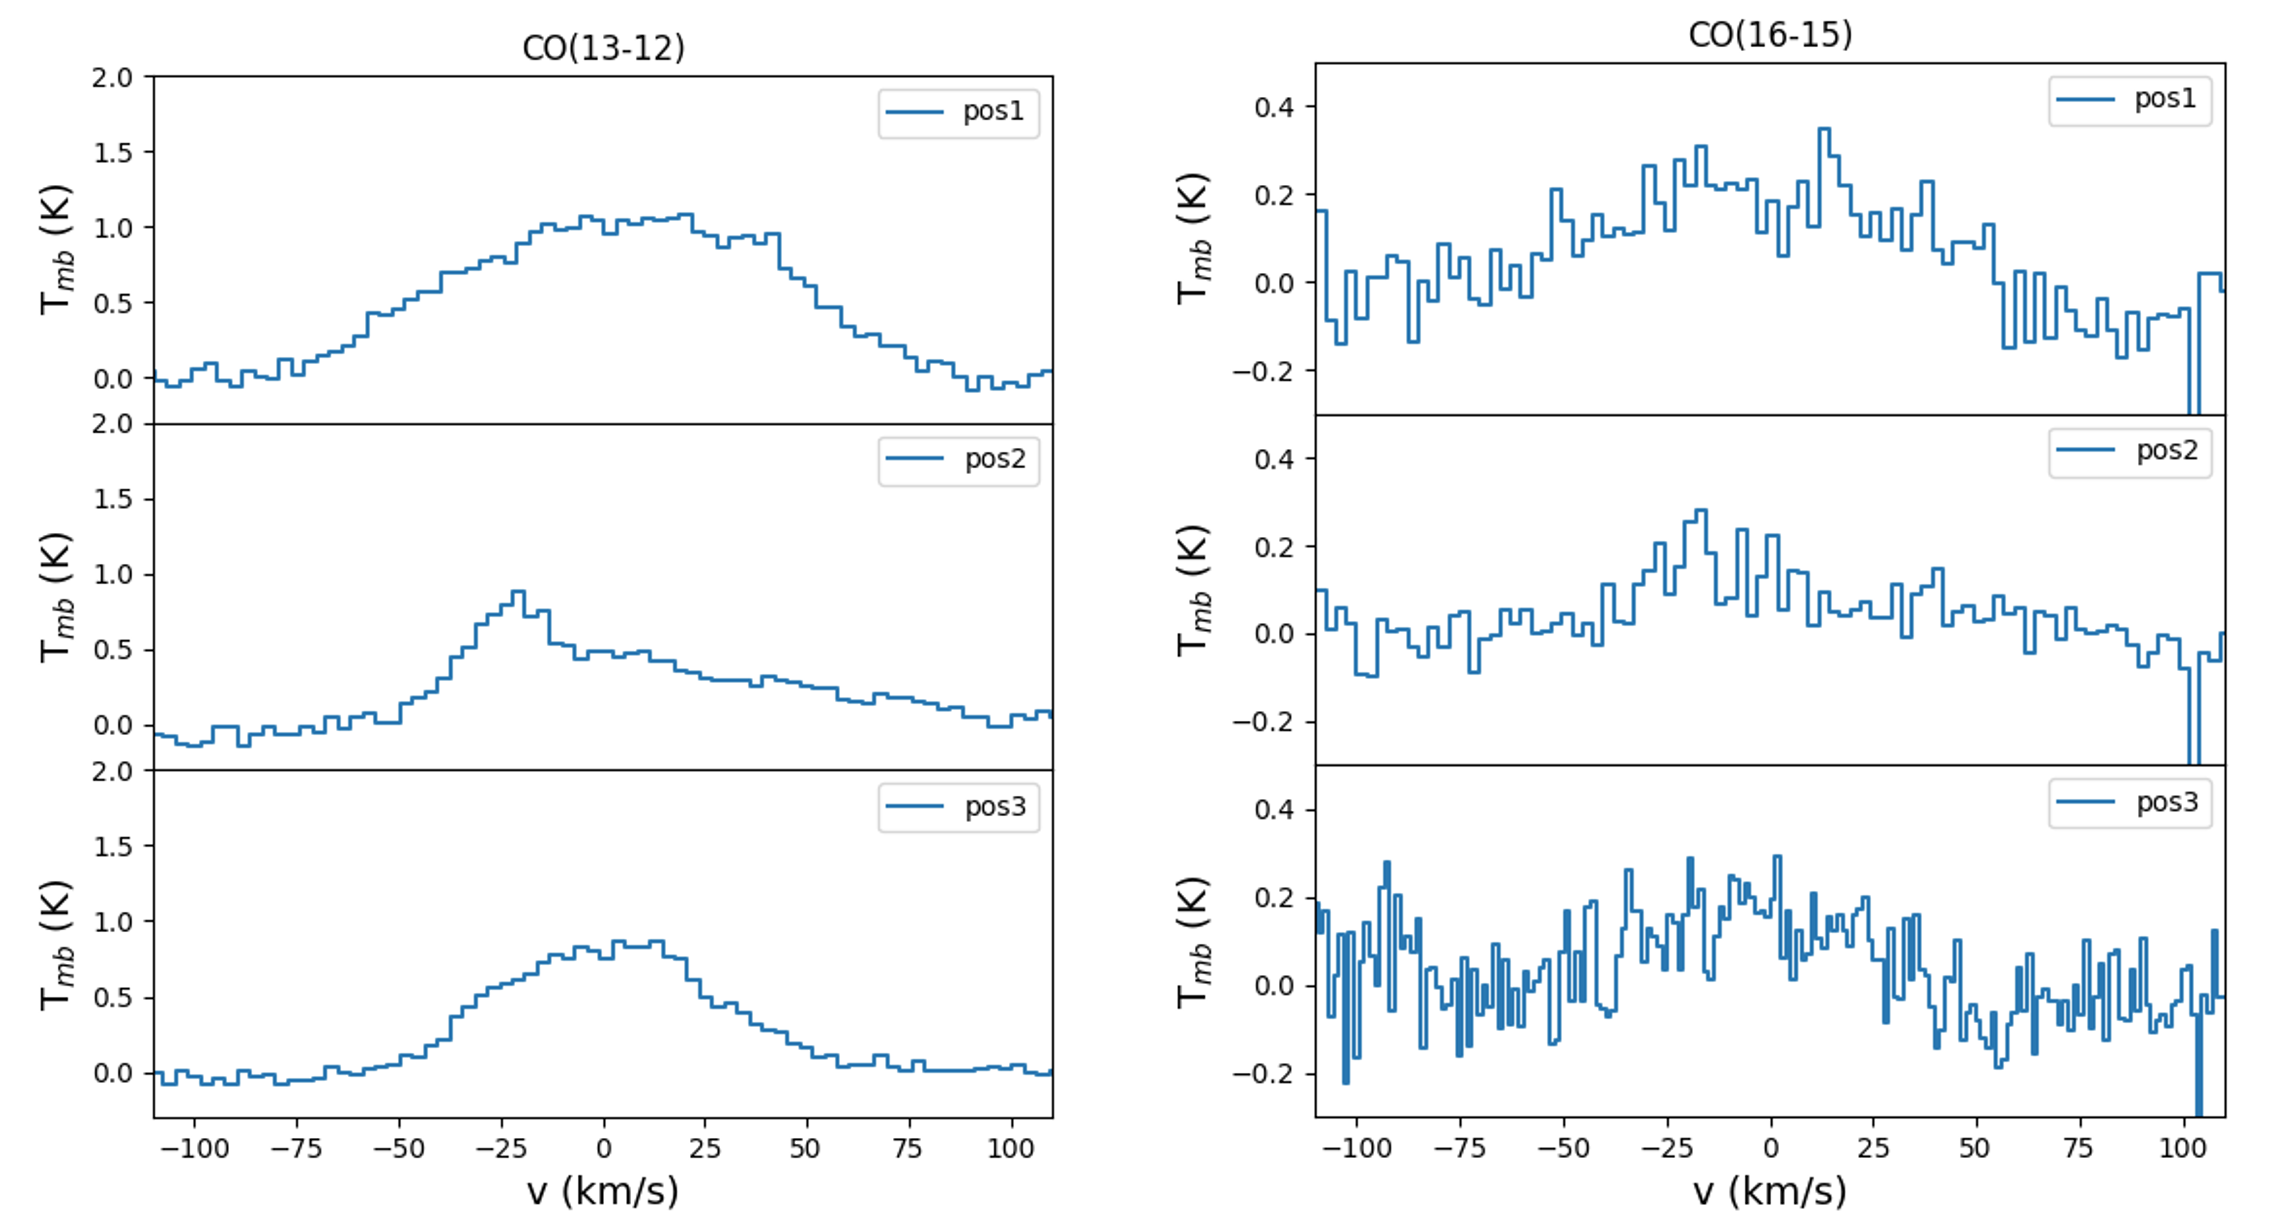 CO(13-12) spectra (left) and CO(16-15) spectra (right) towards the 3 positions observed with GREAT